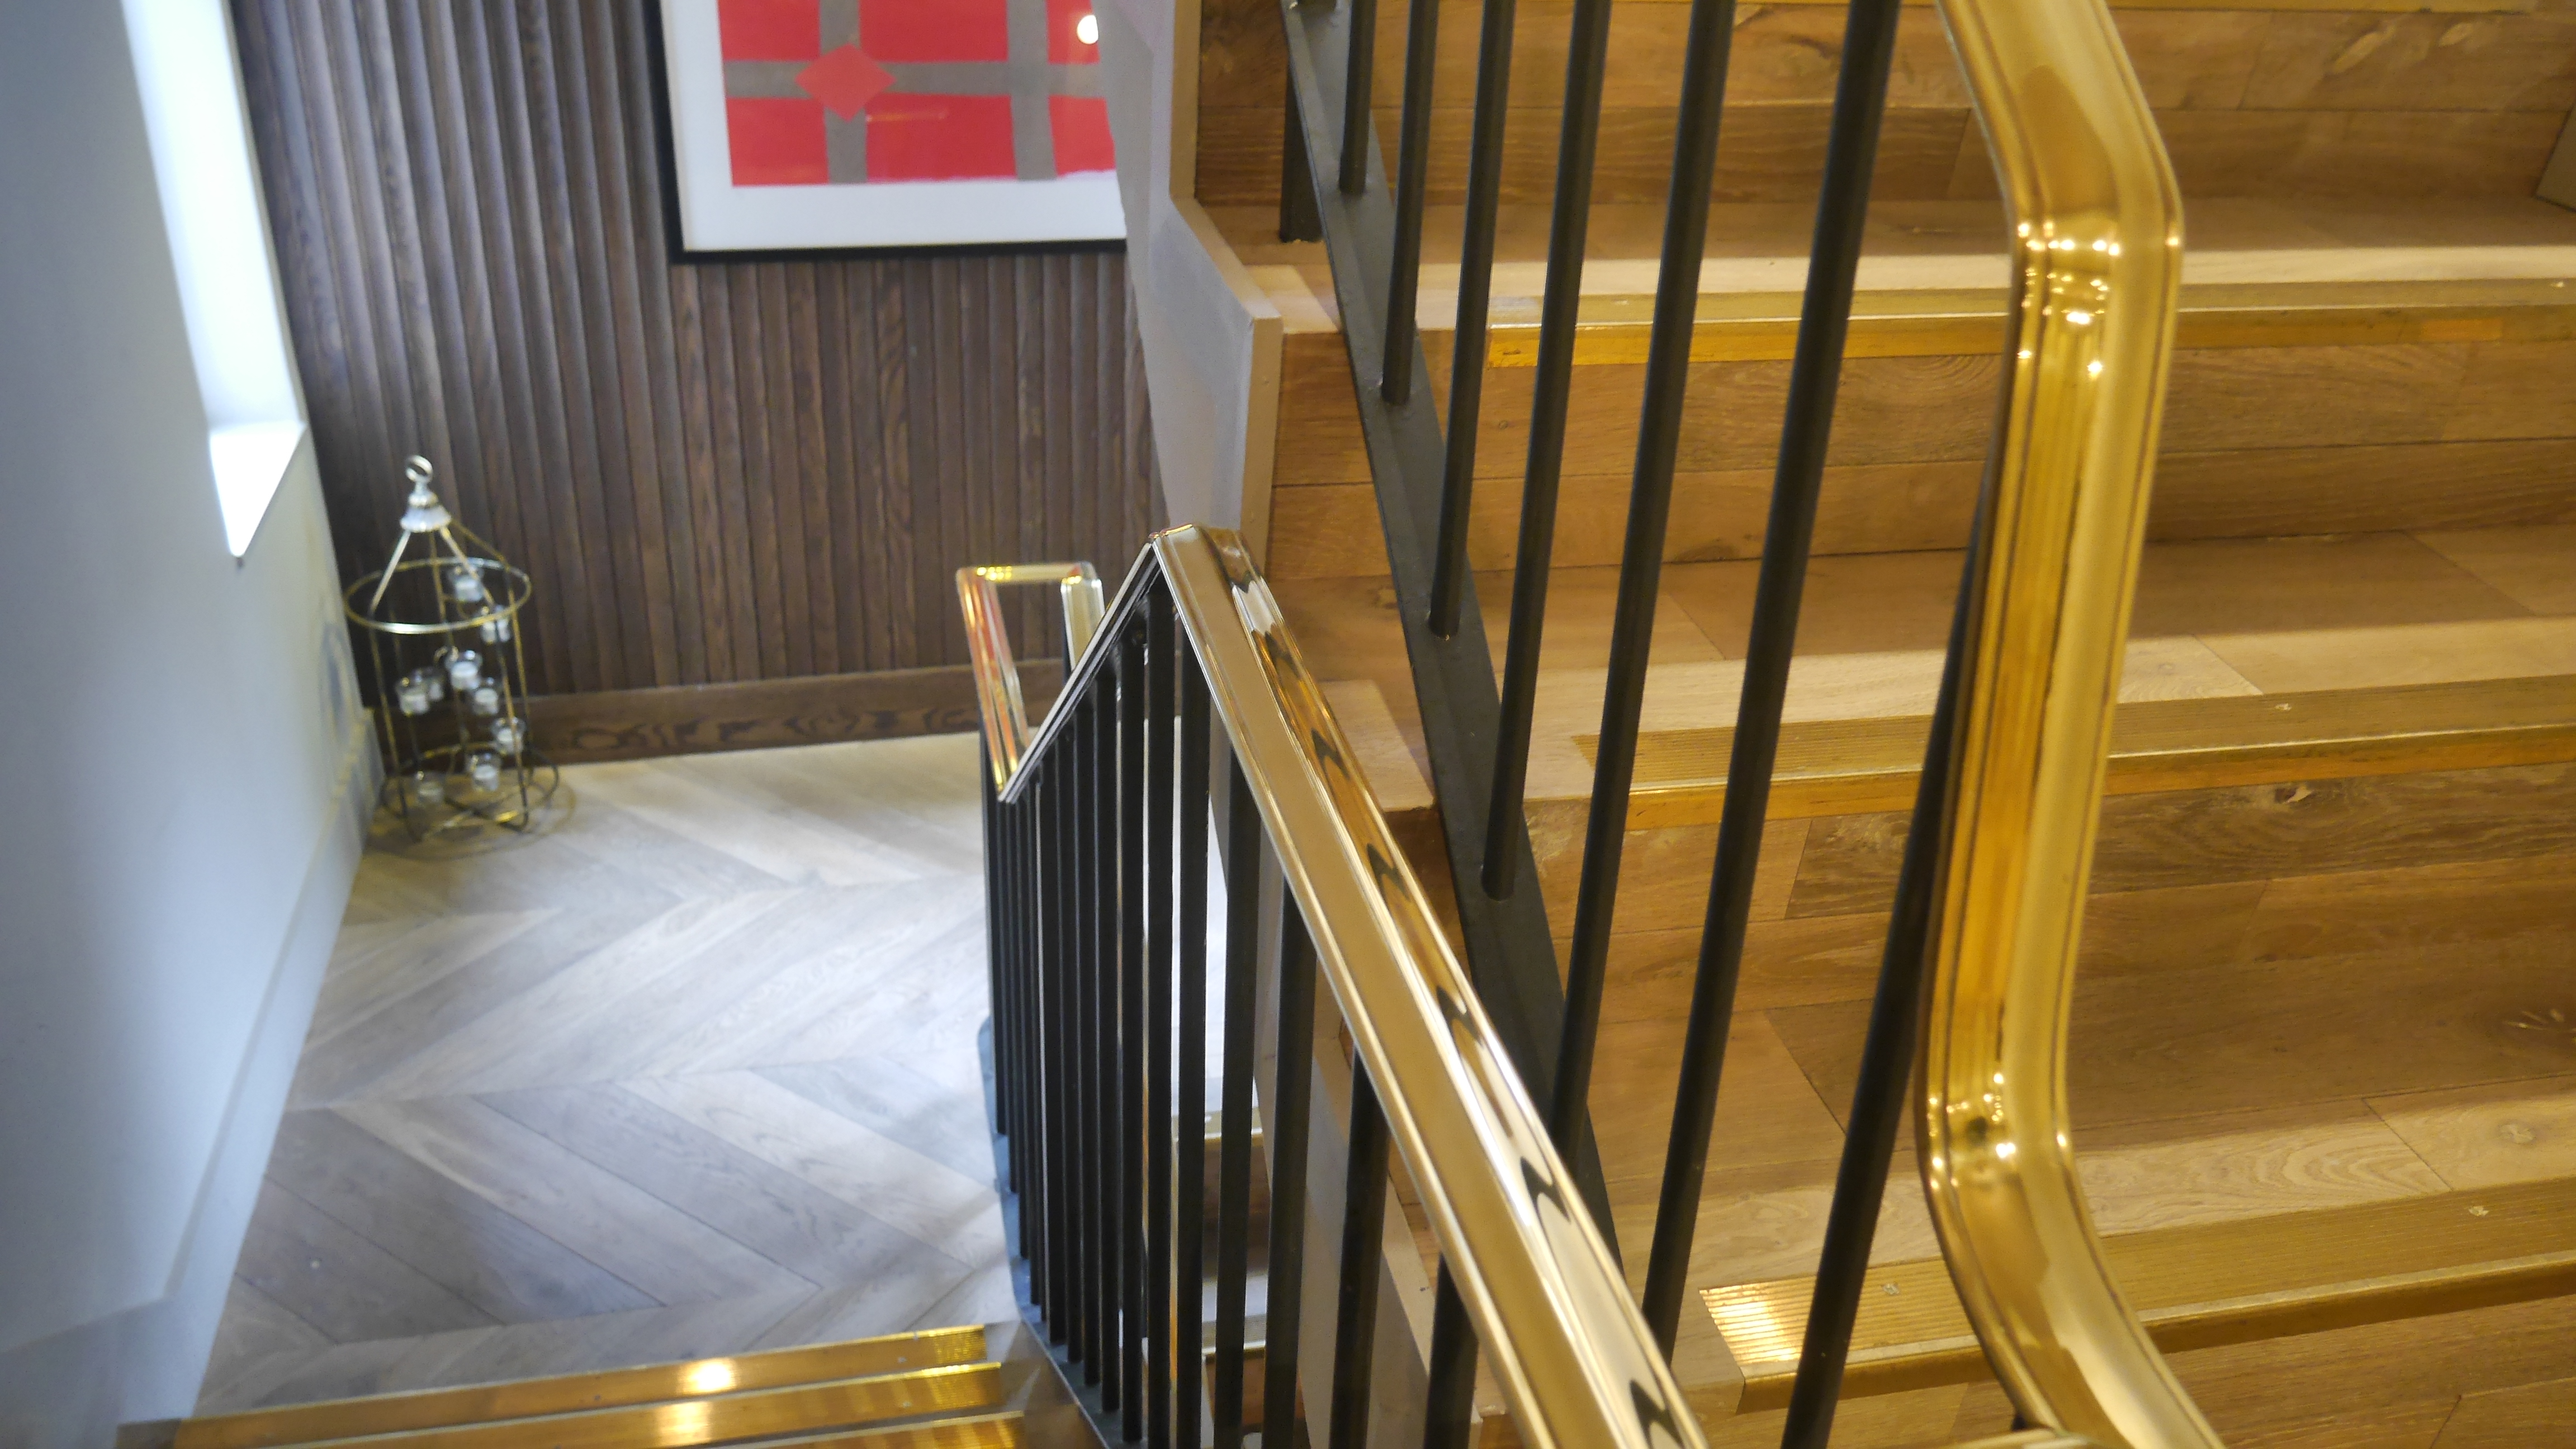 Bespoke Steel and Brass Staircase balustrade for a Hotel in London.